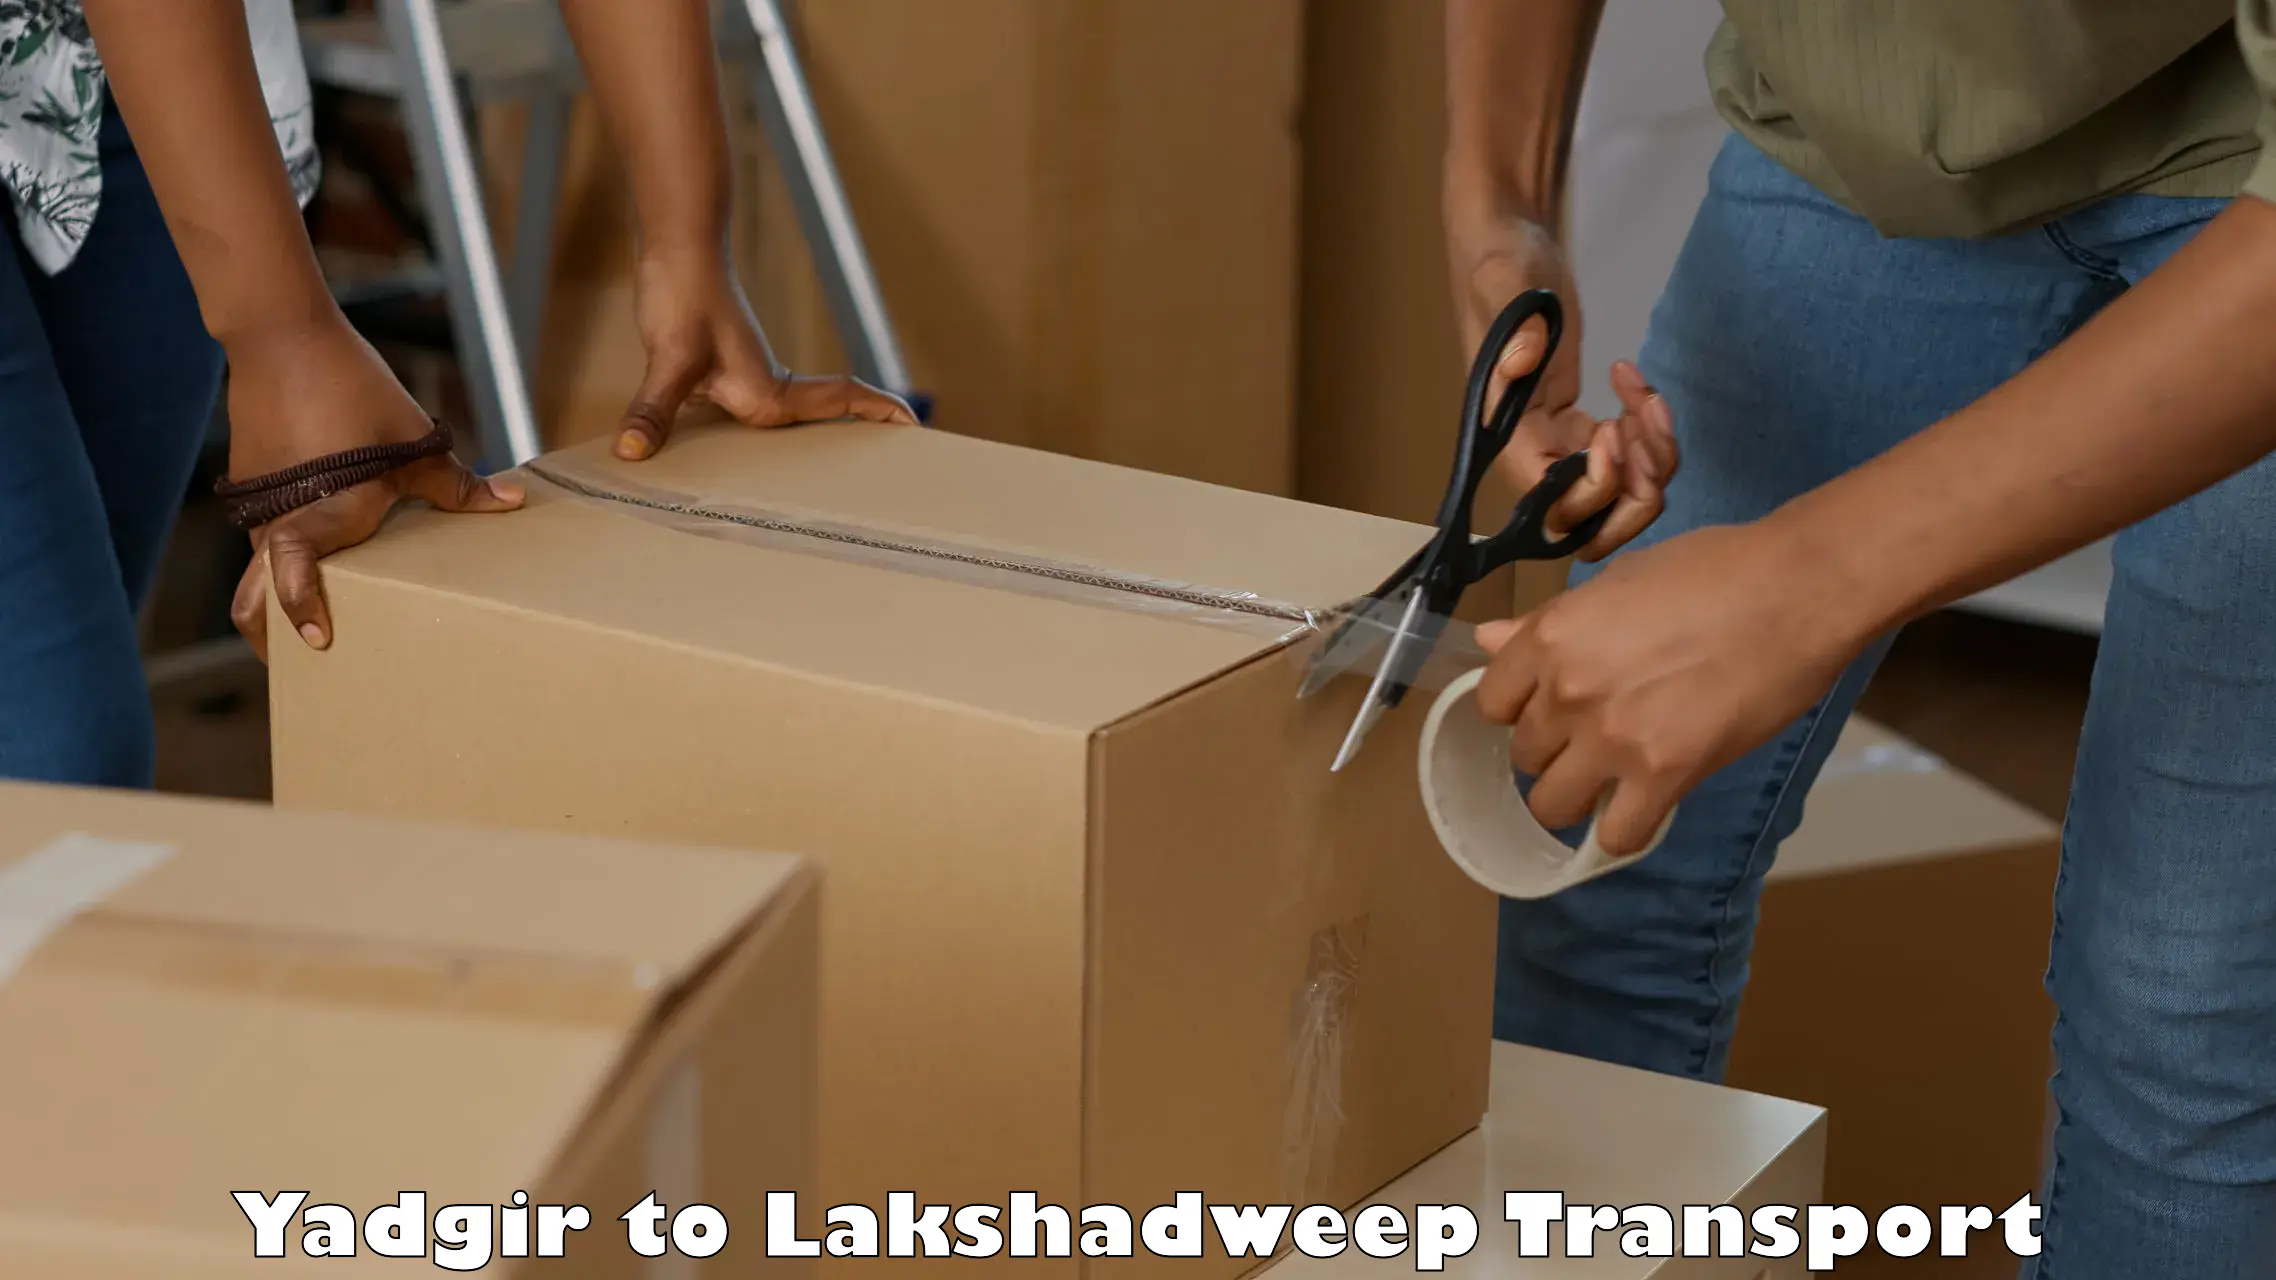 Delivery service Yadgir to Lakshadweep